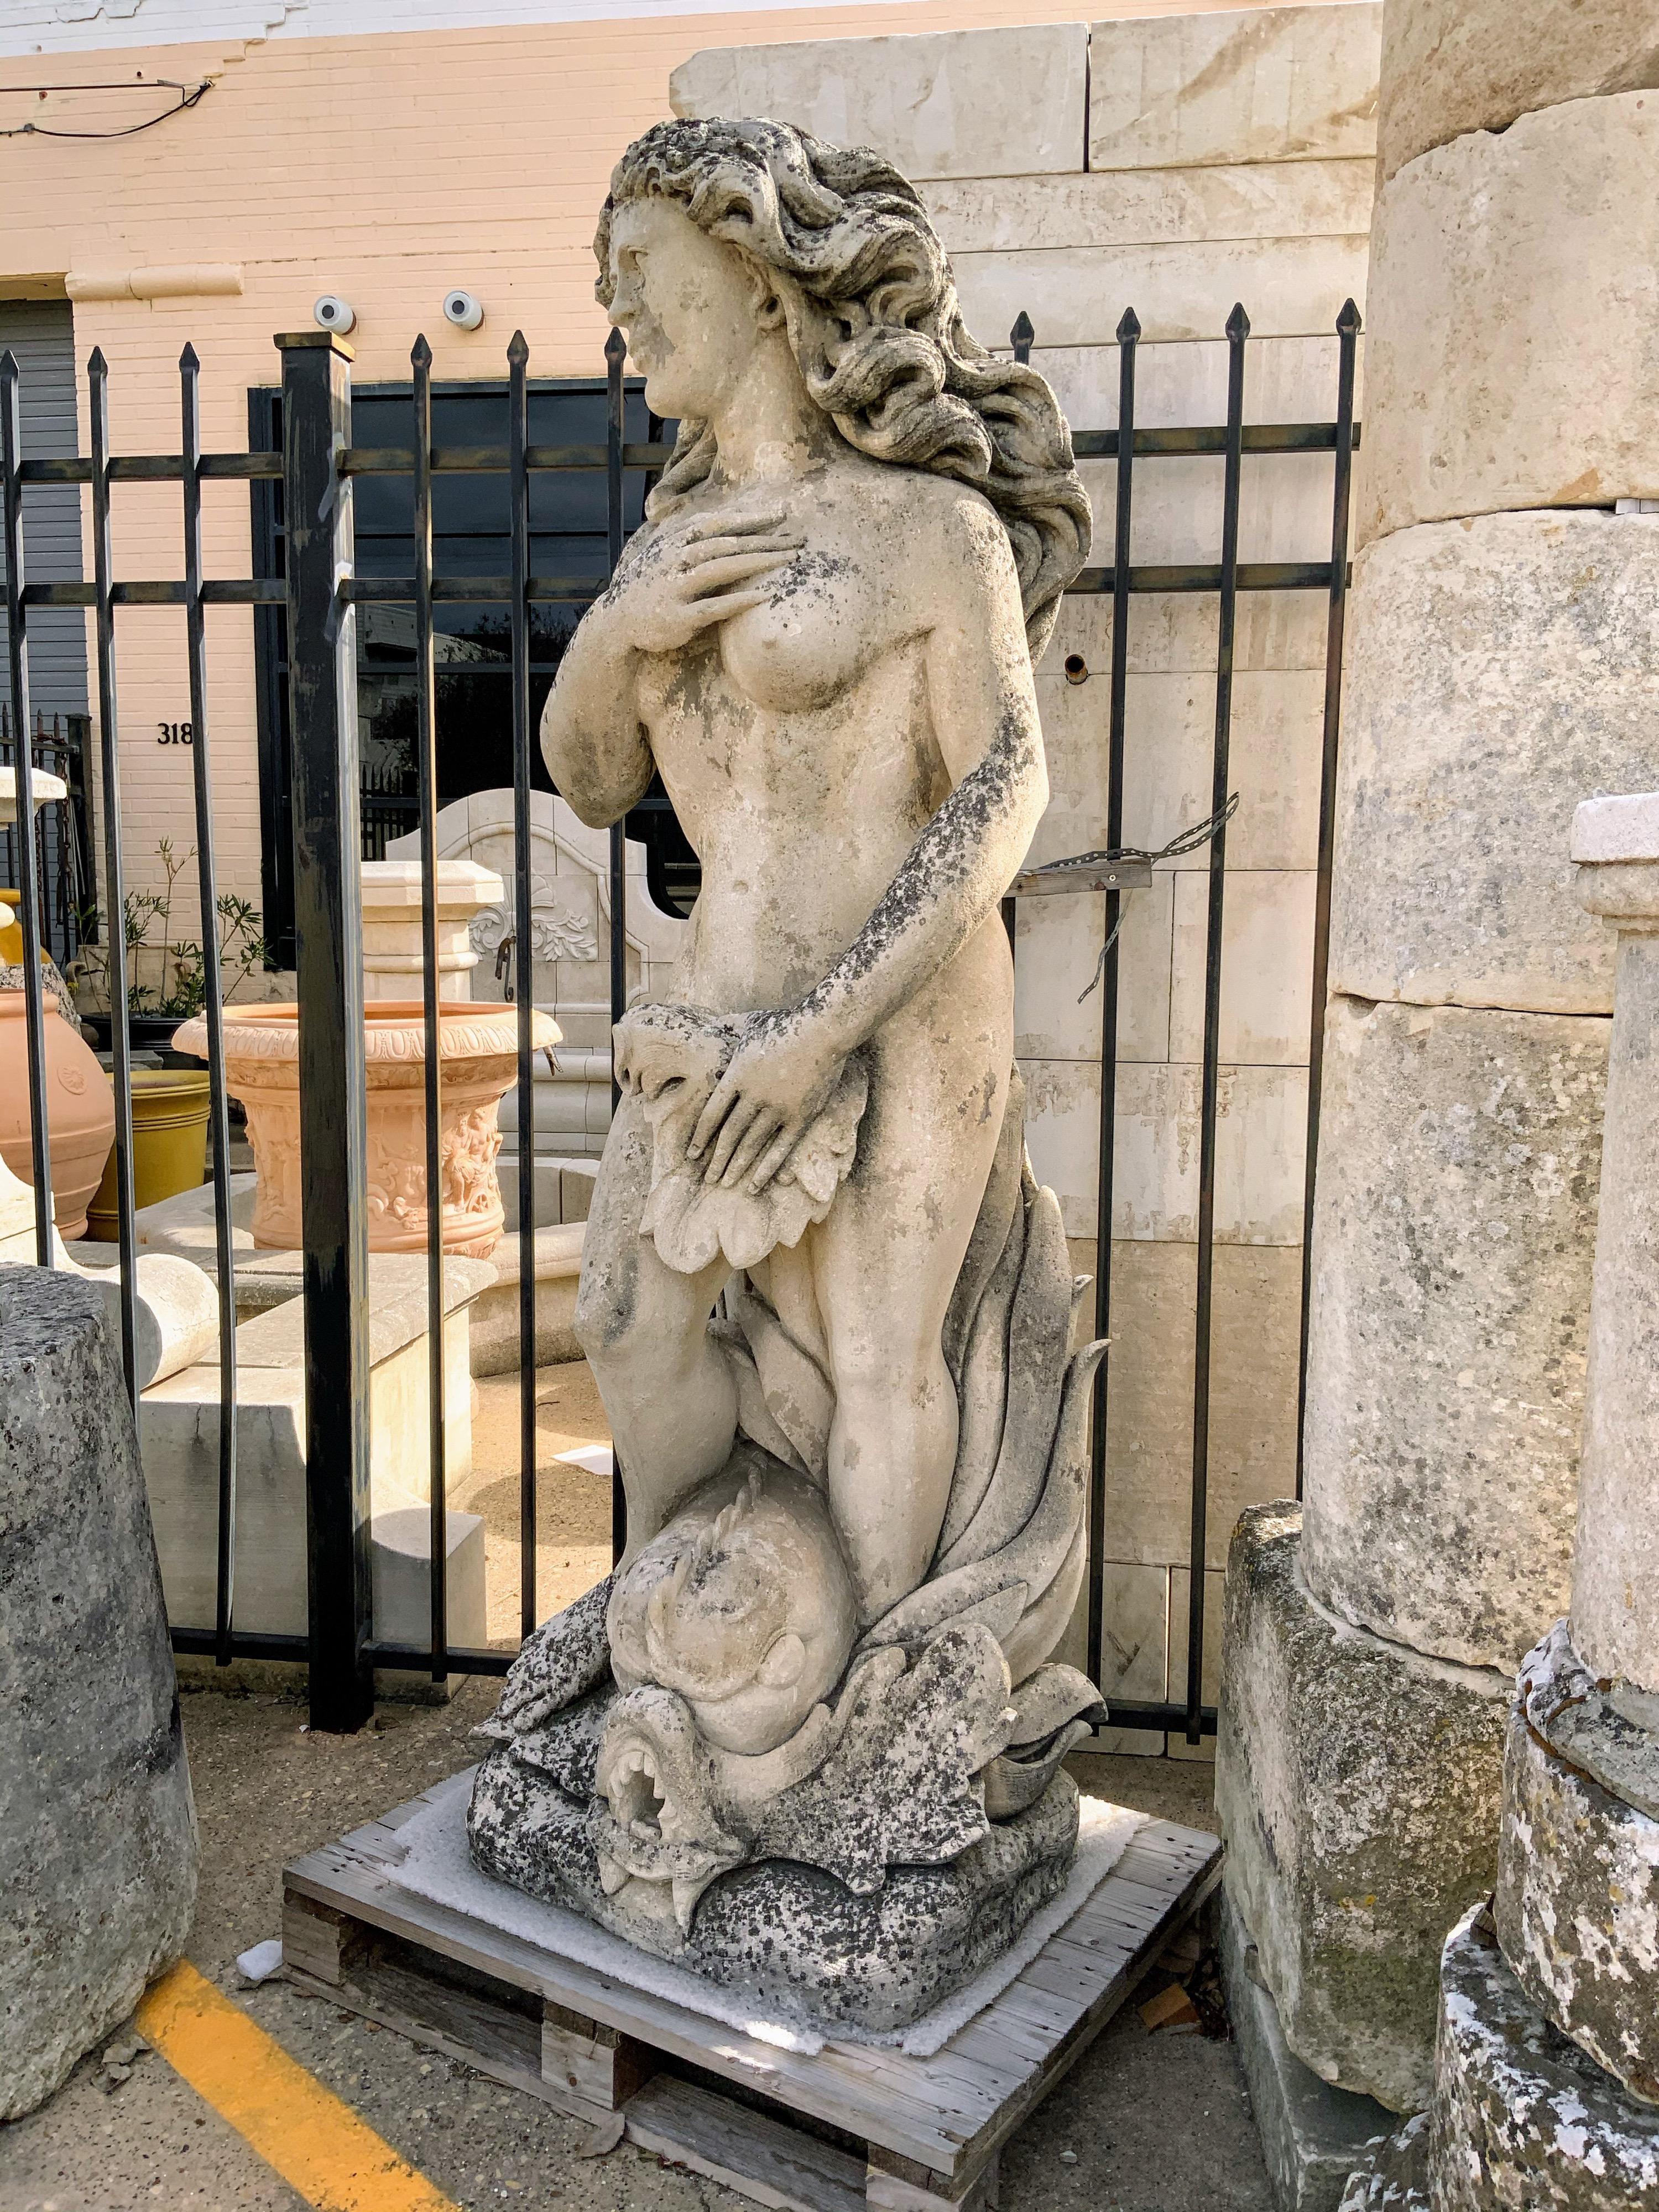 This large limestone statue of a woman origins from Italy, circa 1880.